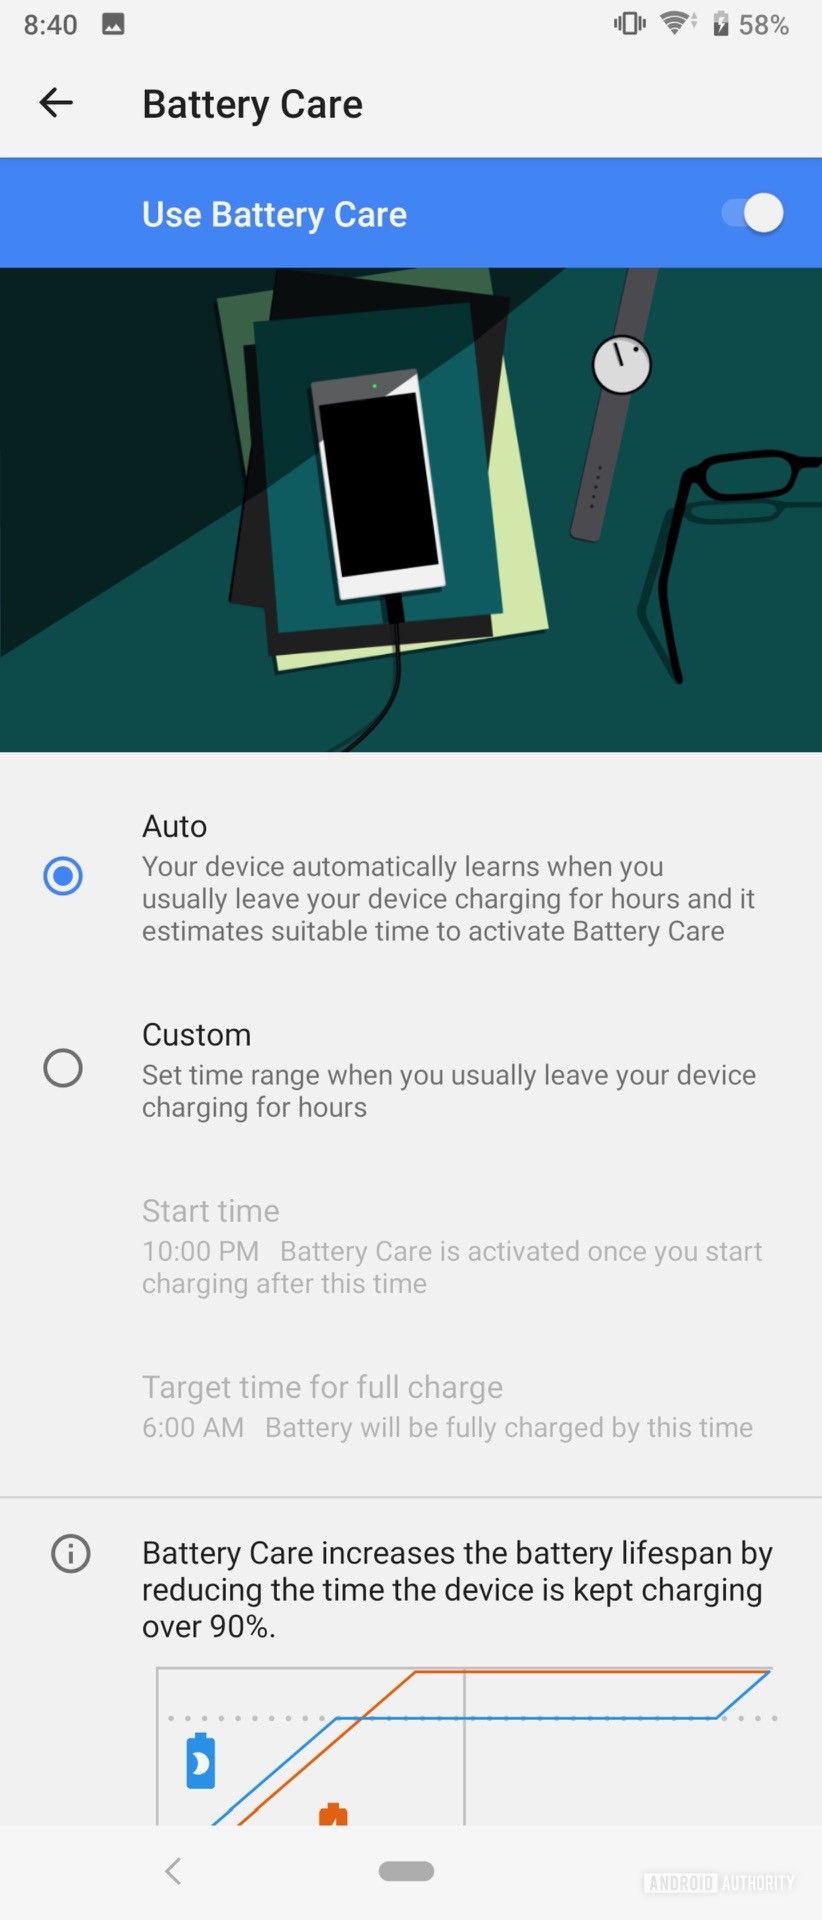 Sony Xperia 1 Review Battery Care